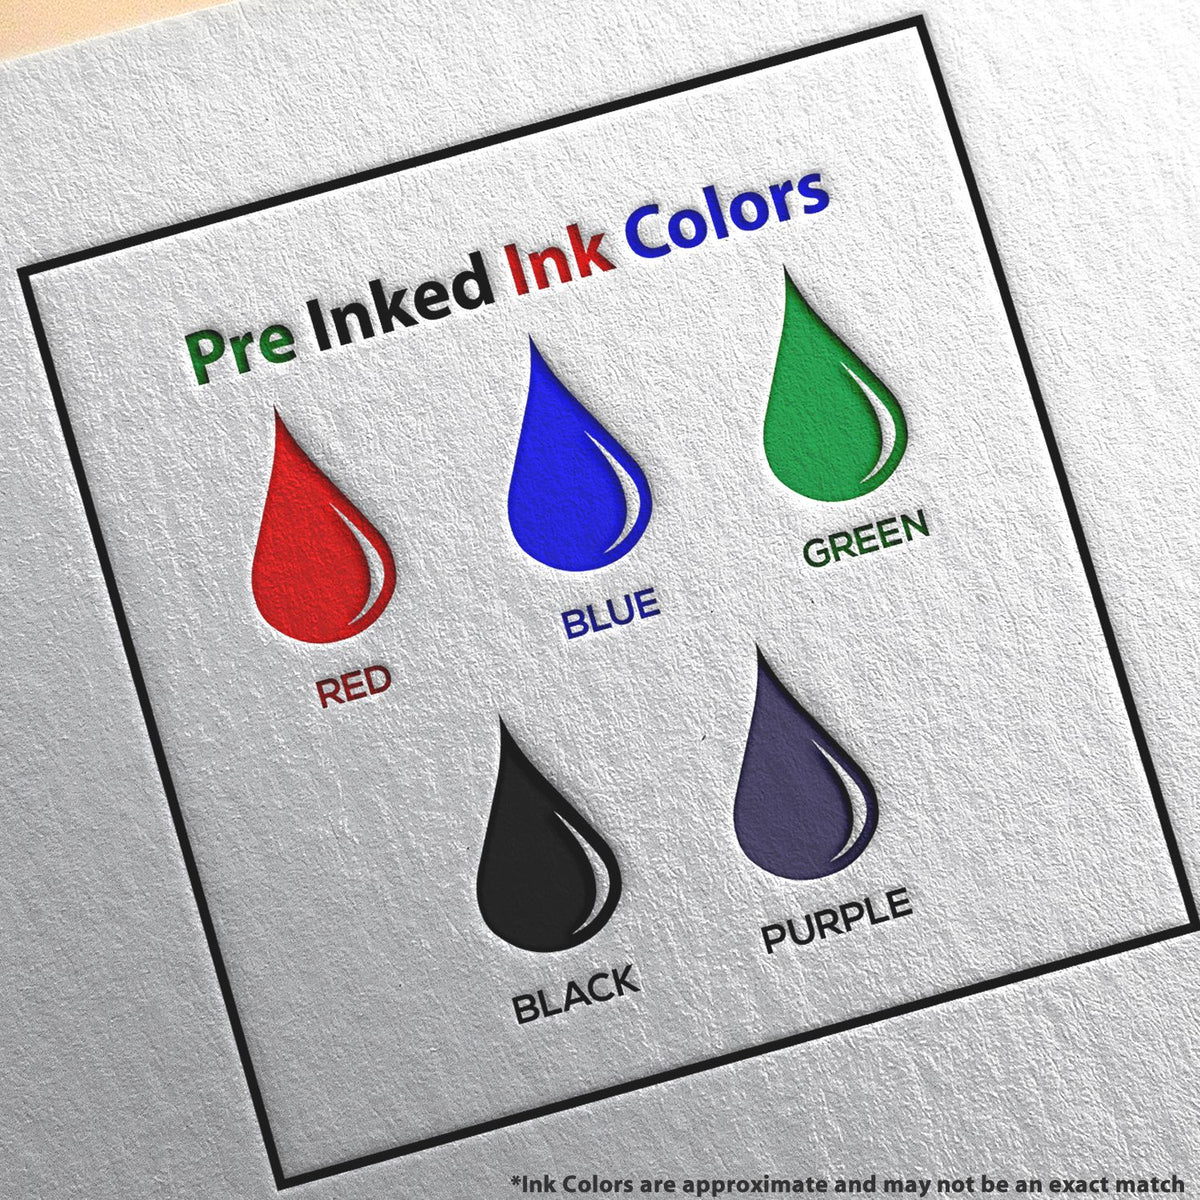 A picture showing the different ink colors or hues available for the MaxLight Premium Pre-Inked Massachusetts State Seal Notarial Stamp product.